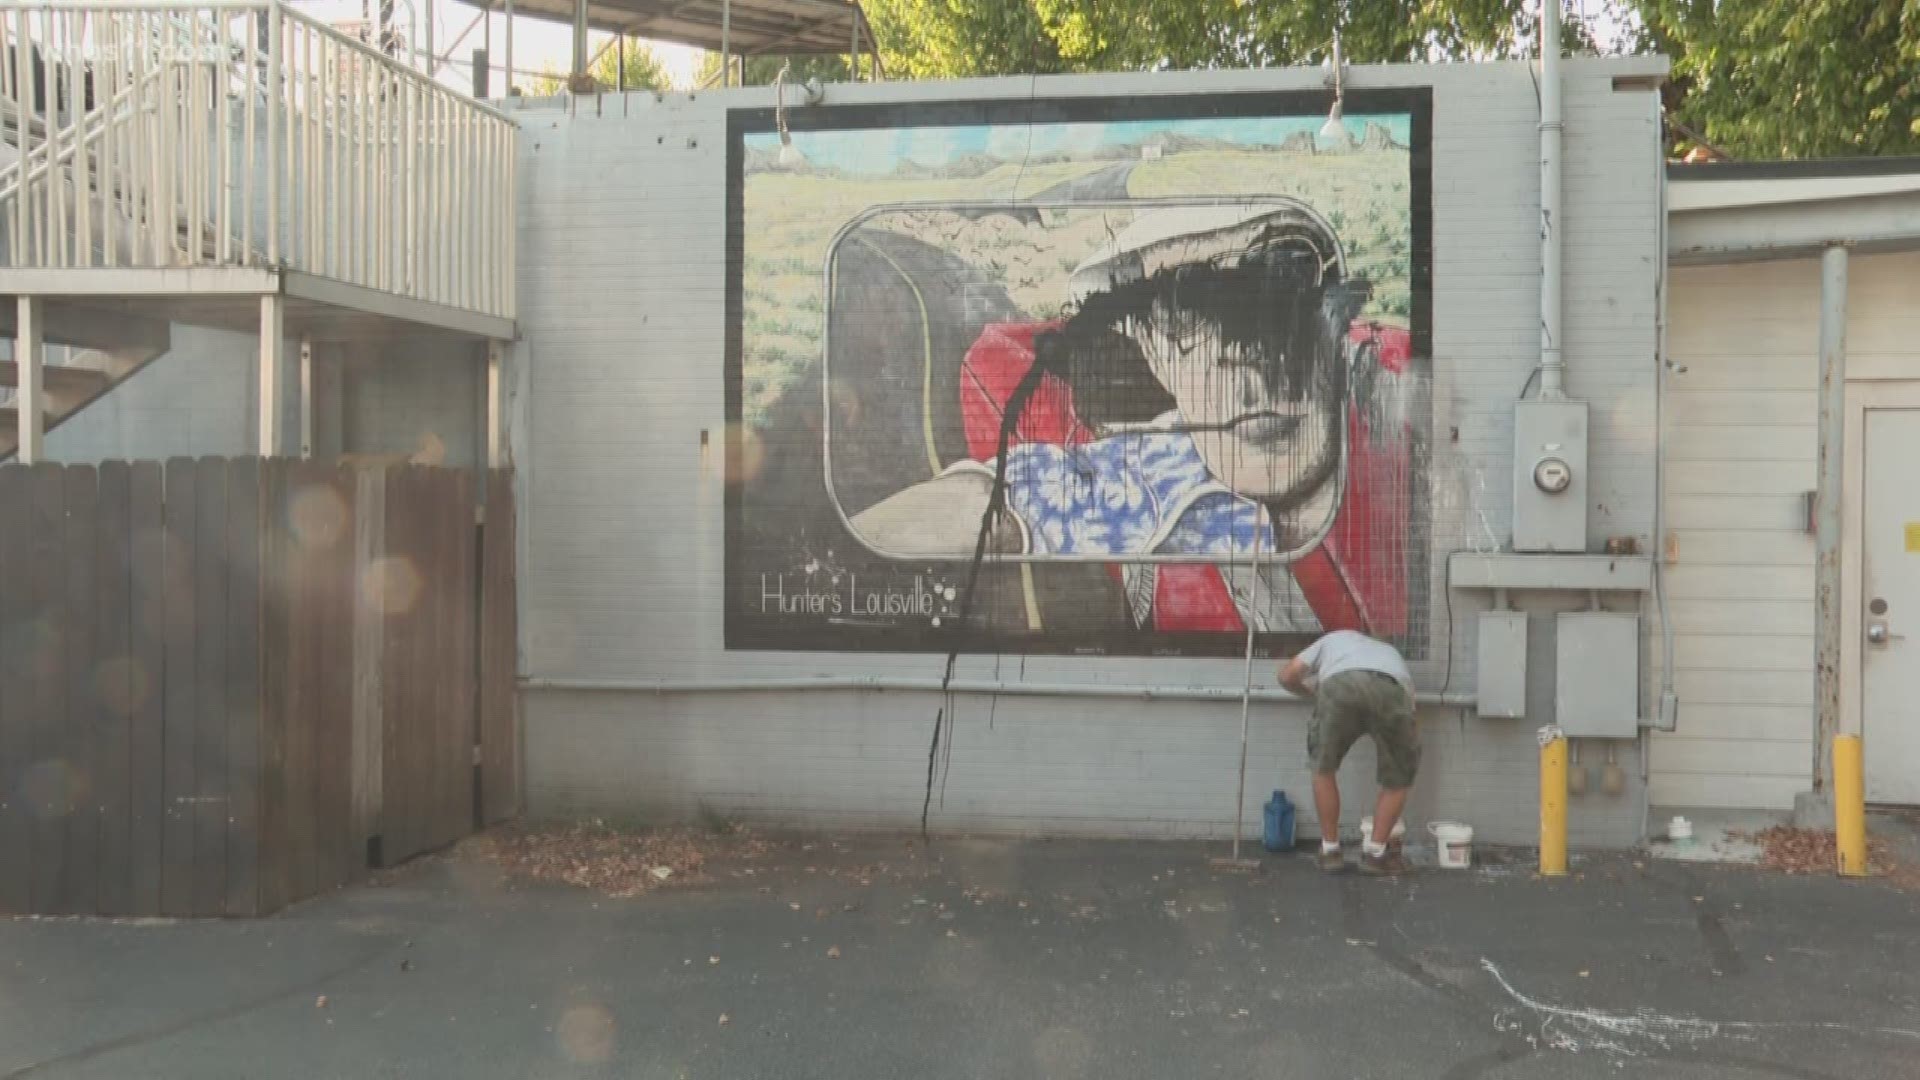 The mural of Hunter S. Thompson near V-Grits was vandalized. One local man made it his mission to clean the mural of the famous author.